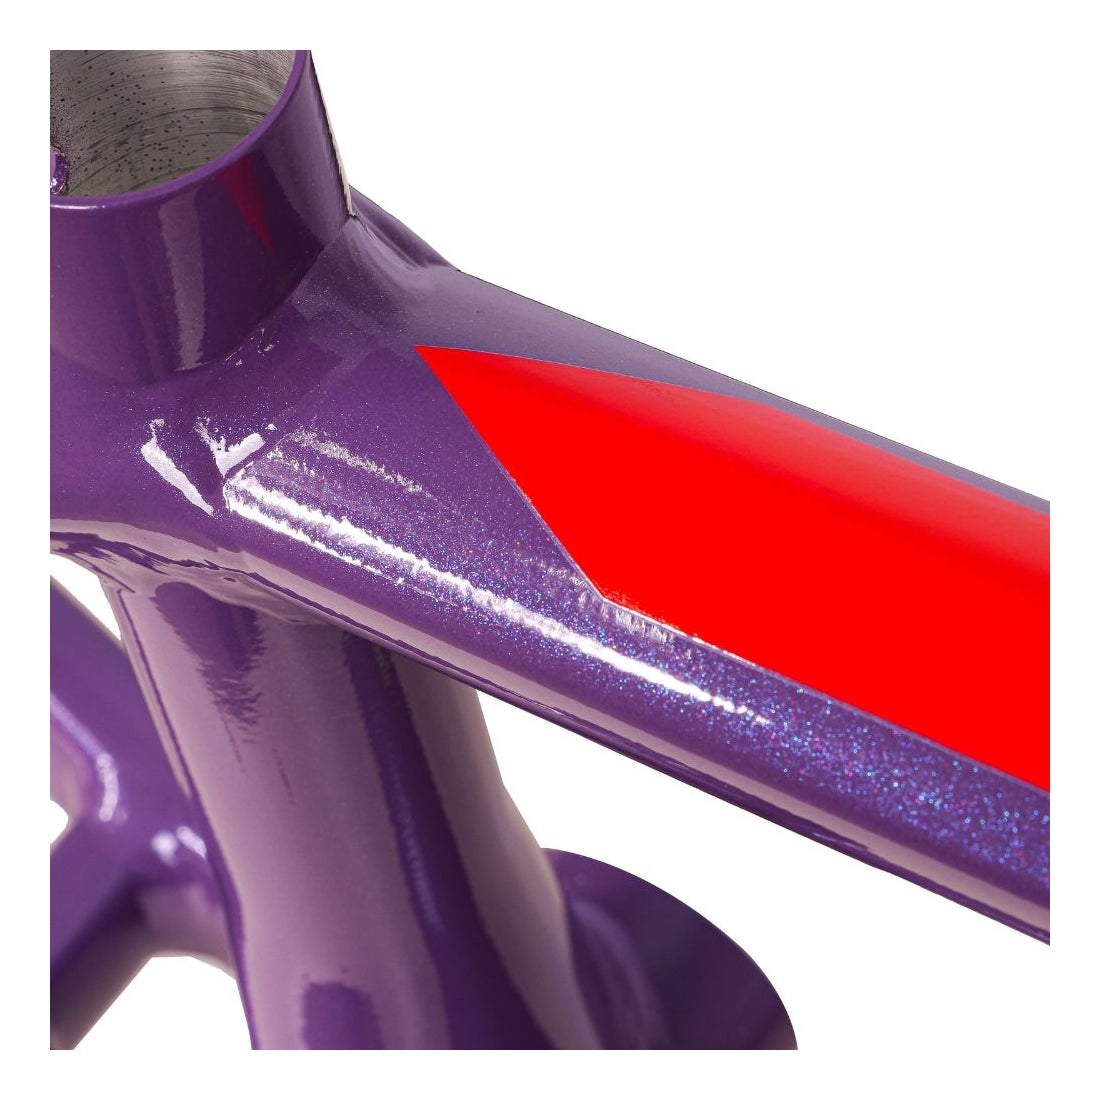 Close-up of a purple metallic hydroformed Inspyre Concorde V3 Expert aluminium BMX Race frame with a red accent.